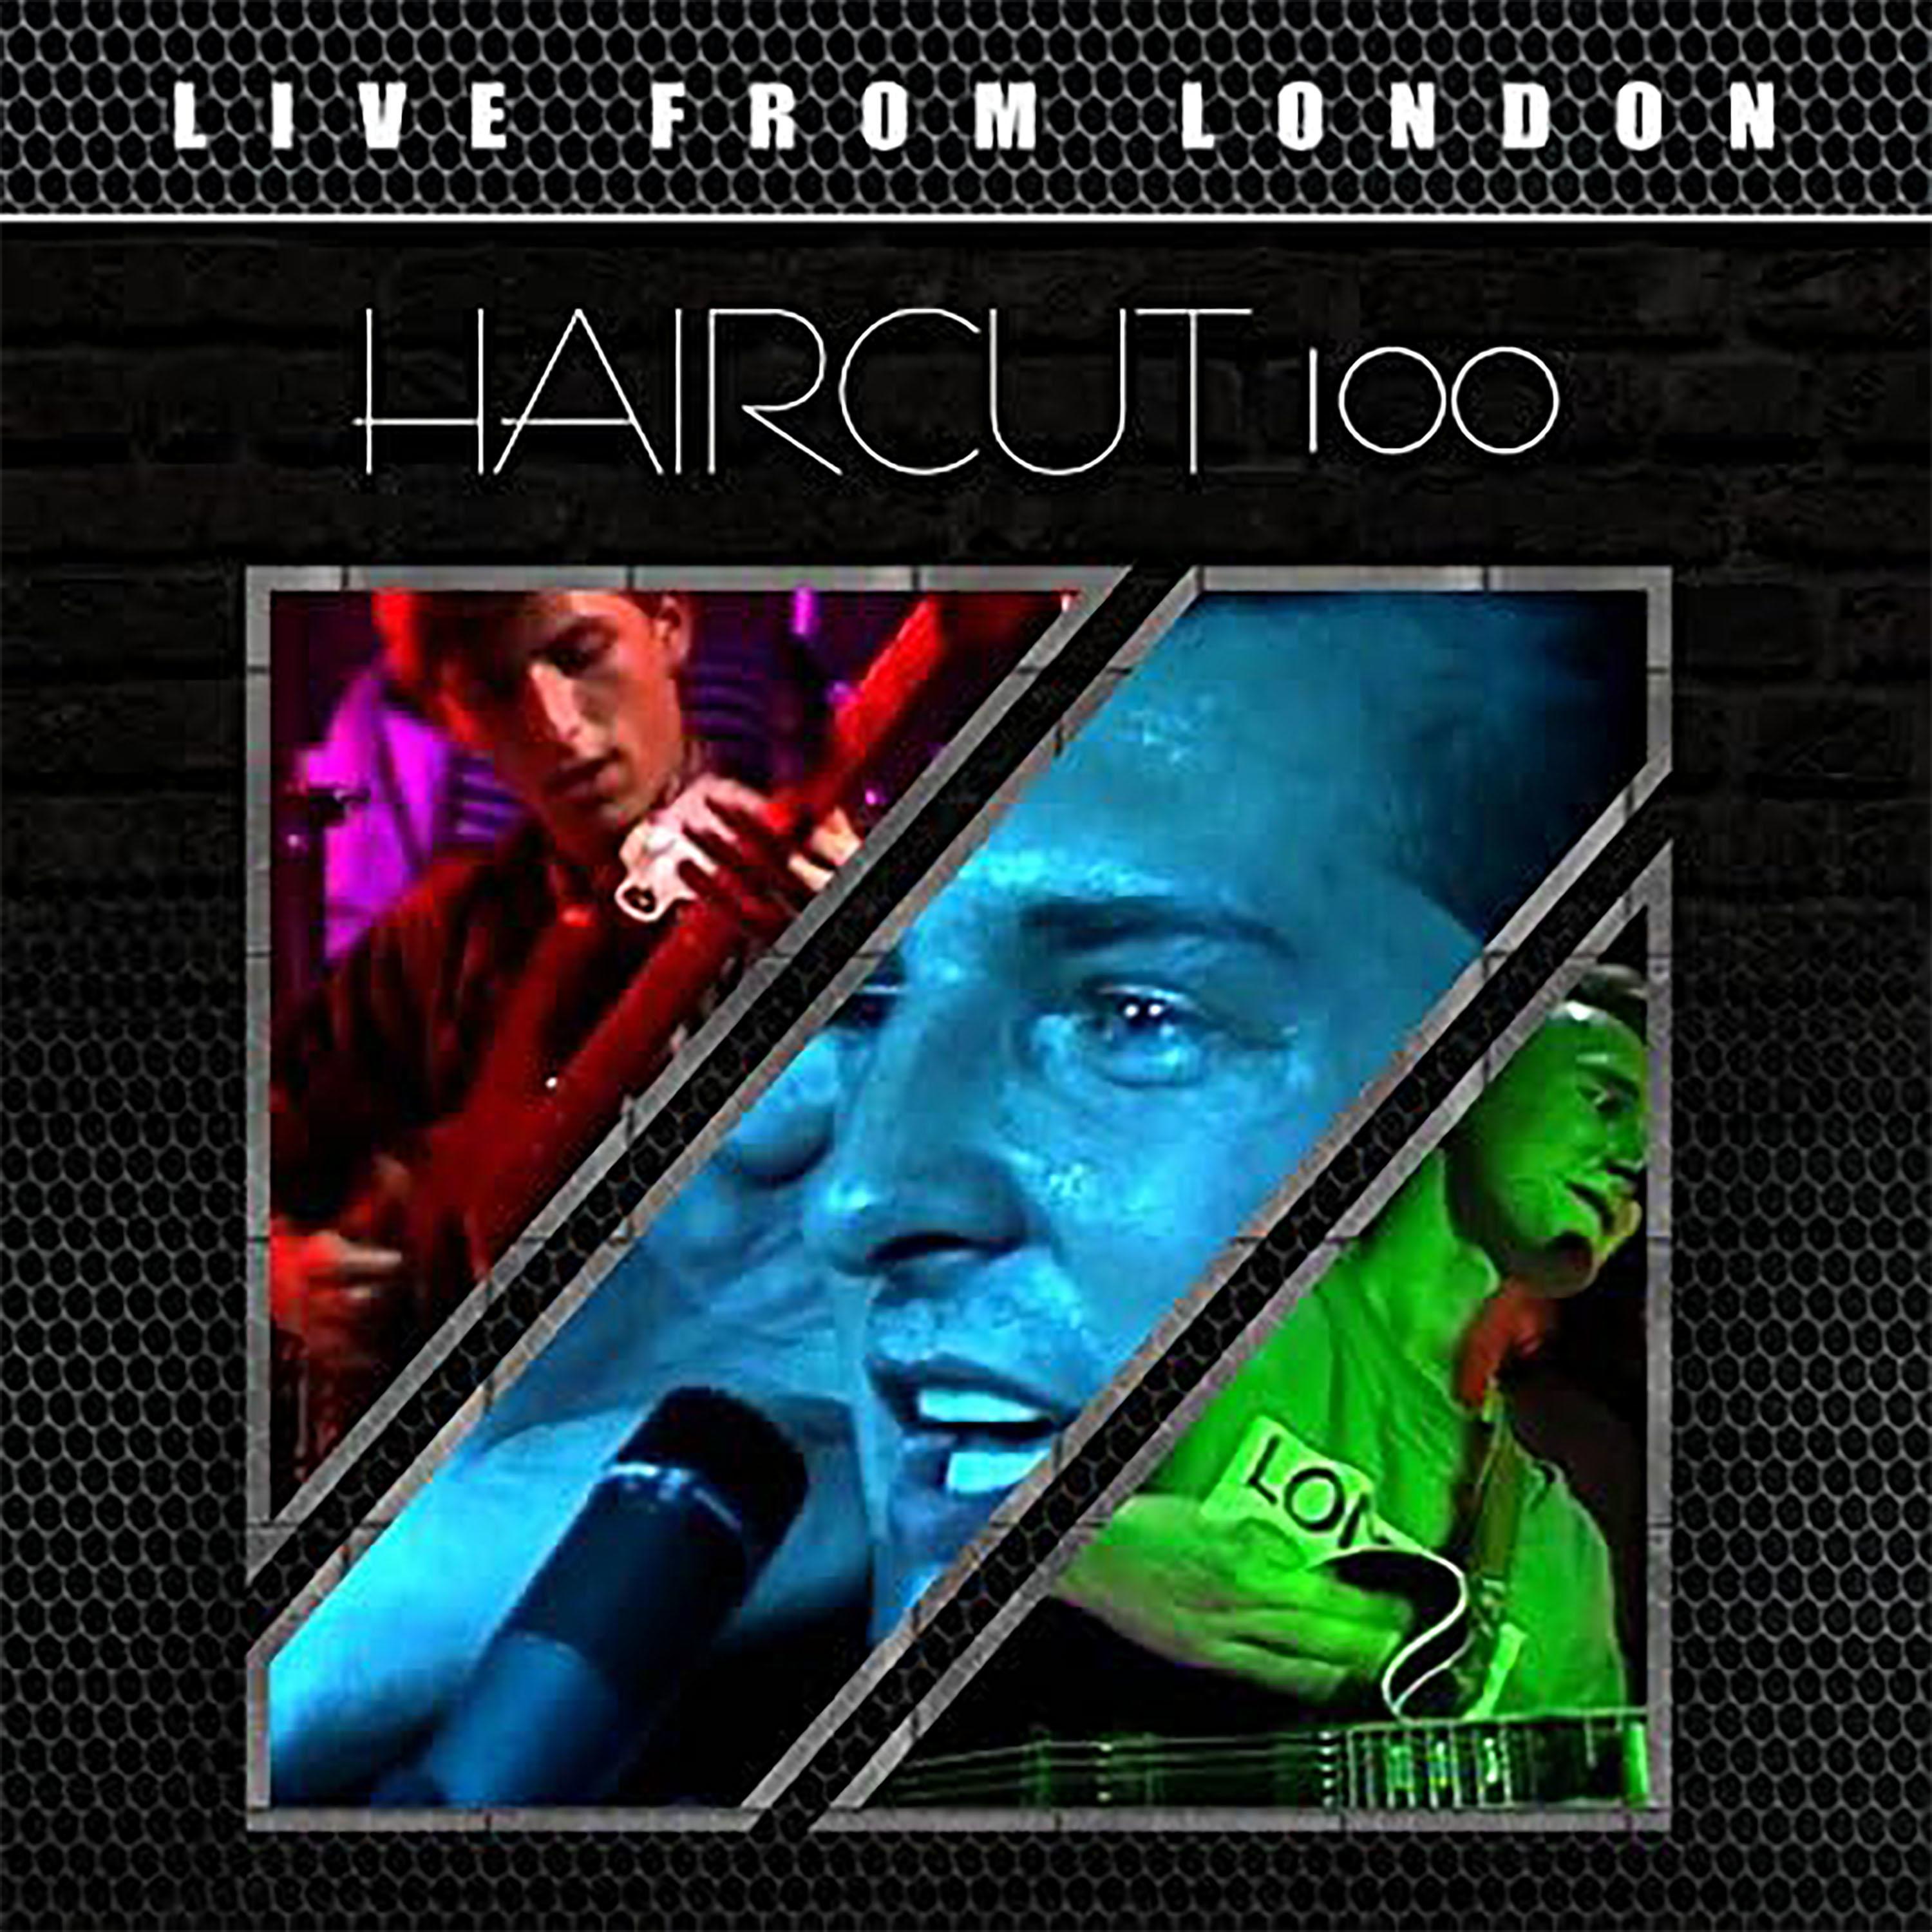 Haircut 100 - Fish In A Bowl (Live)